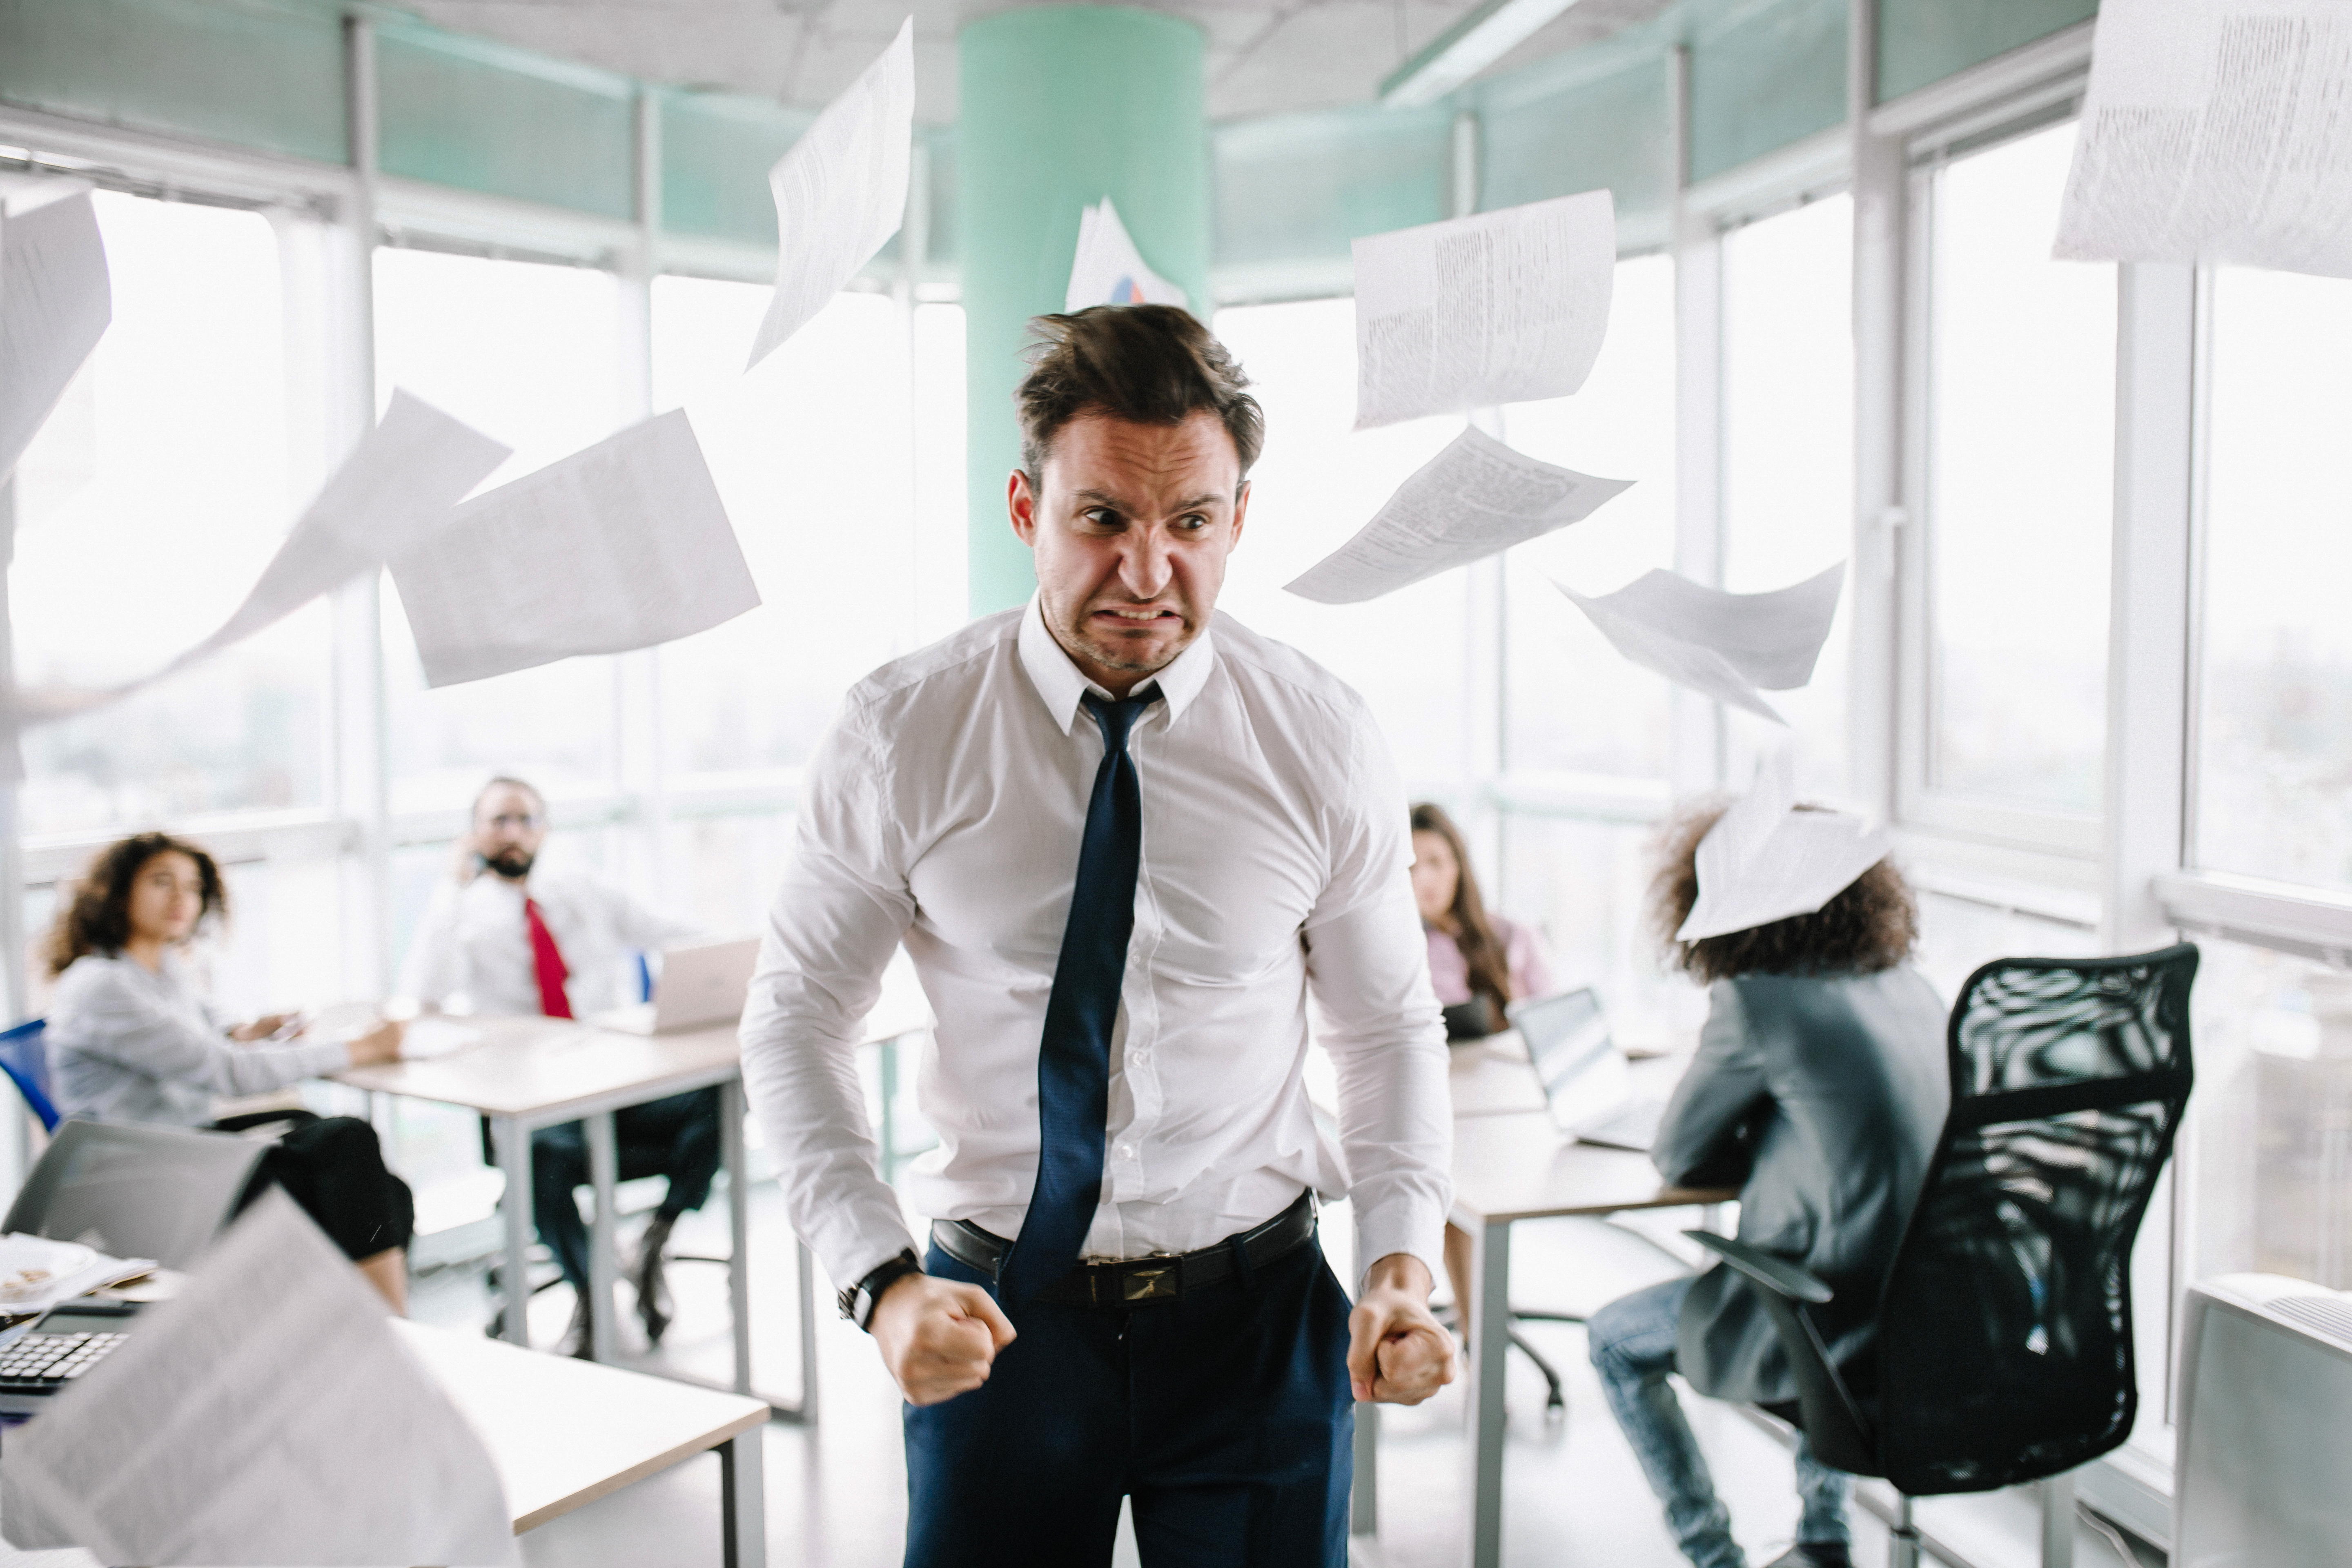 An angry man standing in an office | Source: Shutterstock